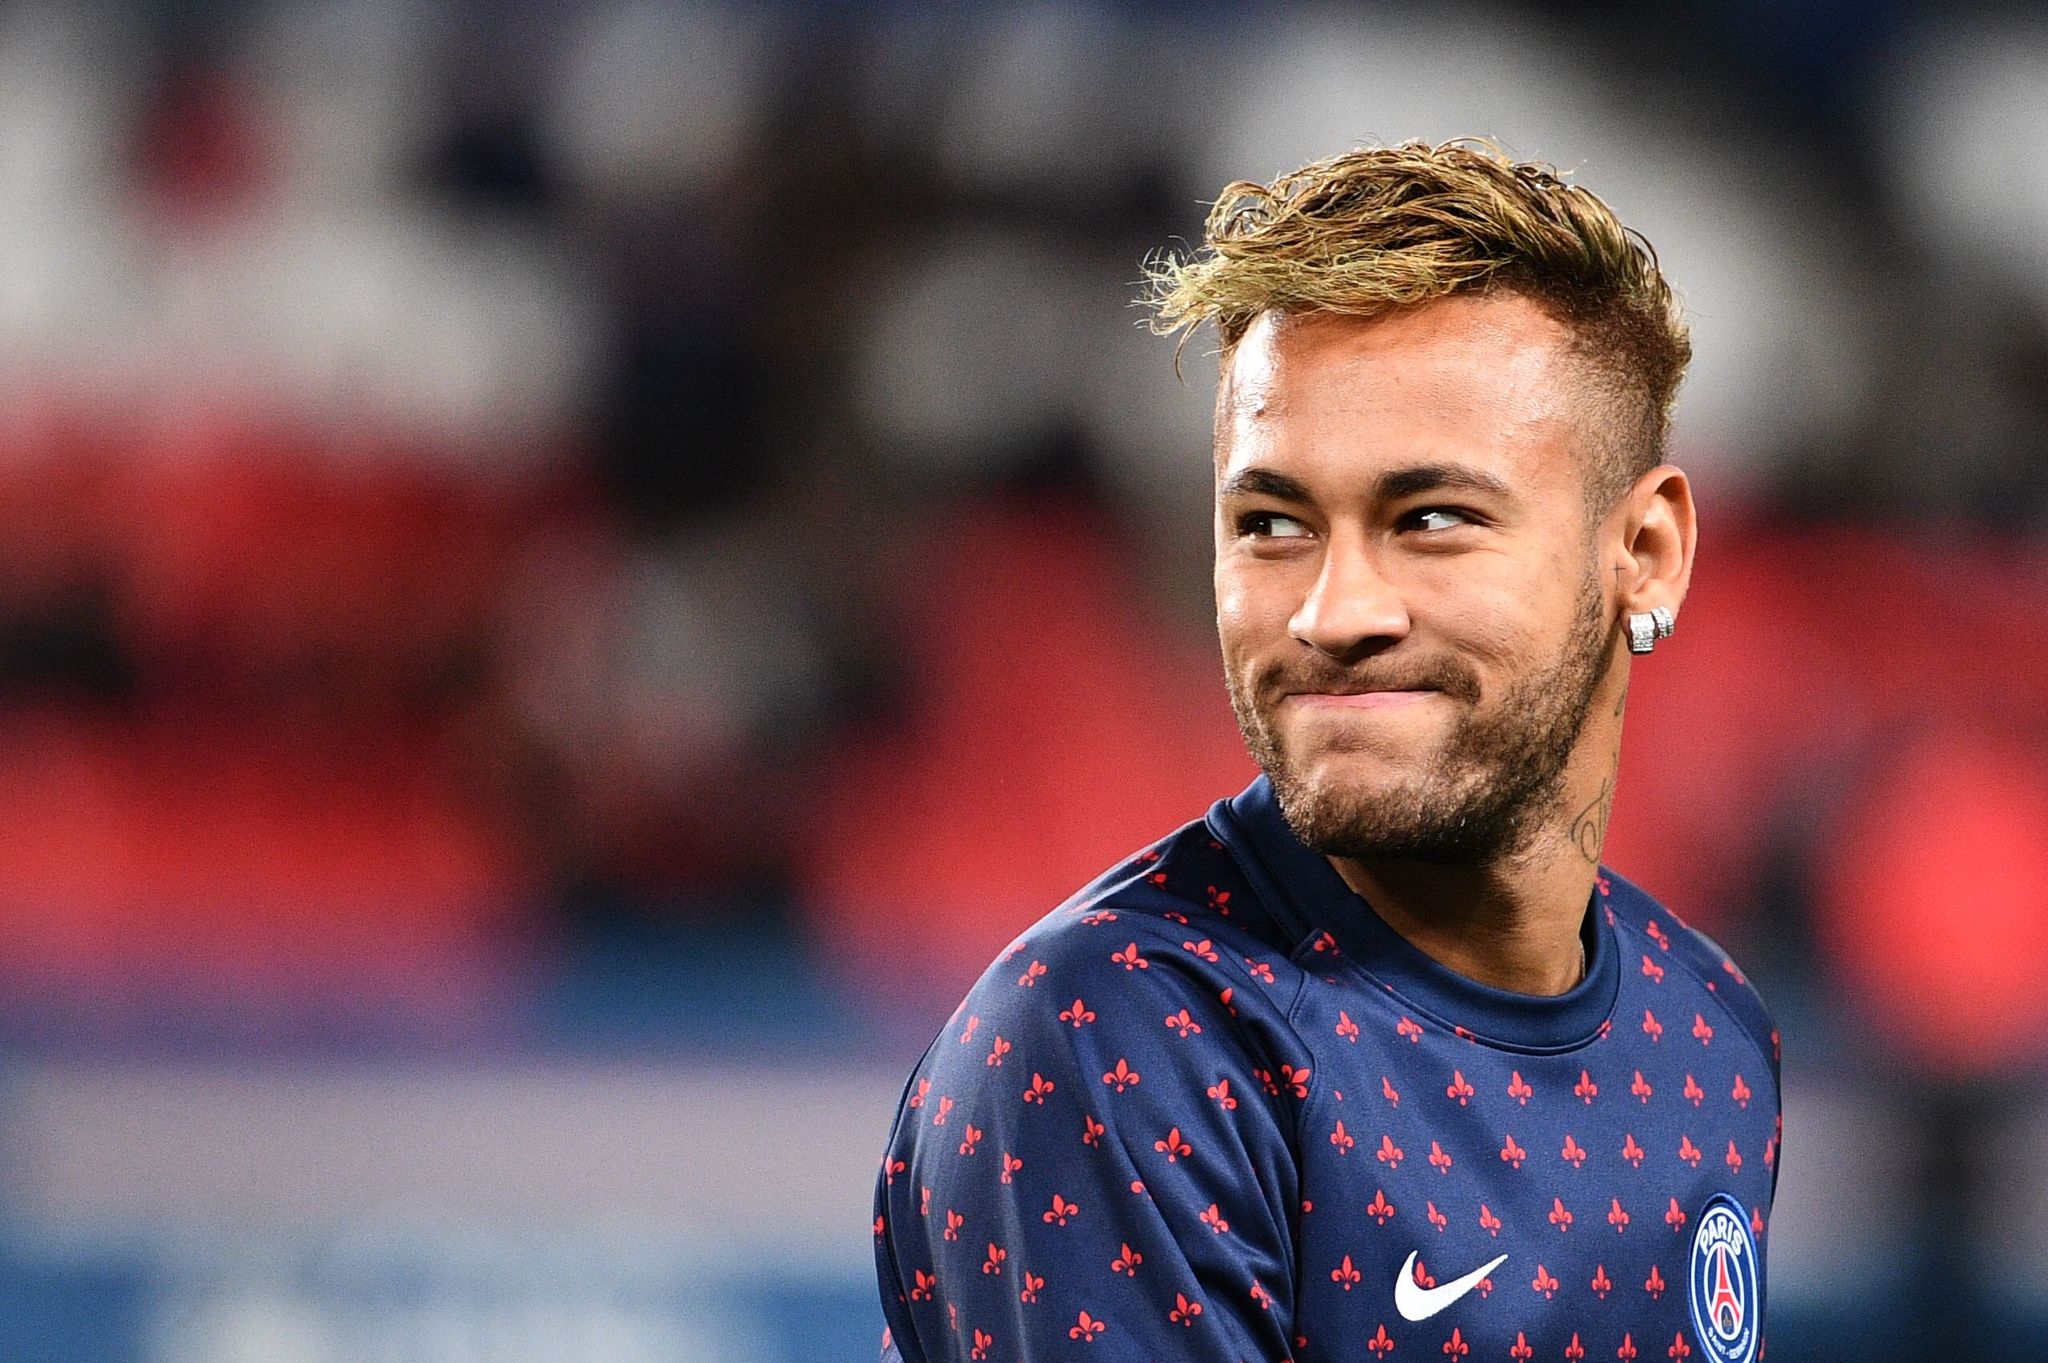 (FILES) In this file photo taken on October 07, 2018 Paris Saint-Germains Brazilian forward <HIT>Neymar</HIT> smiles during warm up prior to the French L1 football match between Paris Saint-Germain (PSG) and Olympique de Lyon (OL) at the Parc des Princes stadium in Paris. A Brazilian judge on August 9, 2019 dismissed the rape case against footballer <HIT>Neymar</HIT> citing insufficient evidence, court sources told AFP. - The decision -- the final episode in the rape case against the Brazilian international superstar -- comes on the recommendations of prosecutors just over a month after police dropped the case citing lack of evidence. (Photo by FRANCK FIFE / AFP)